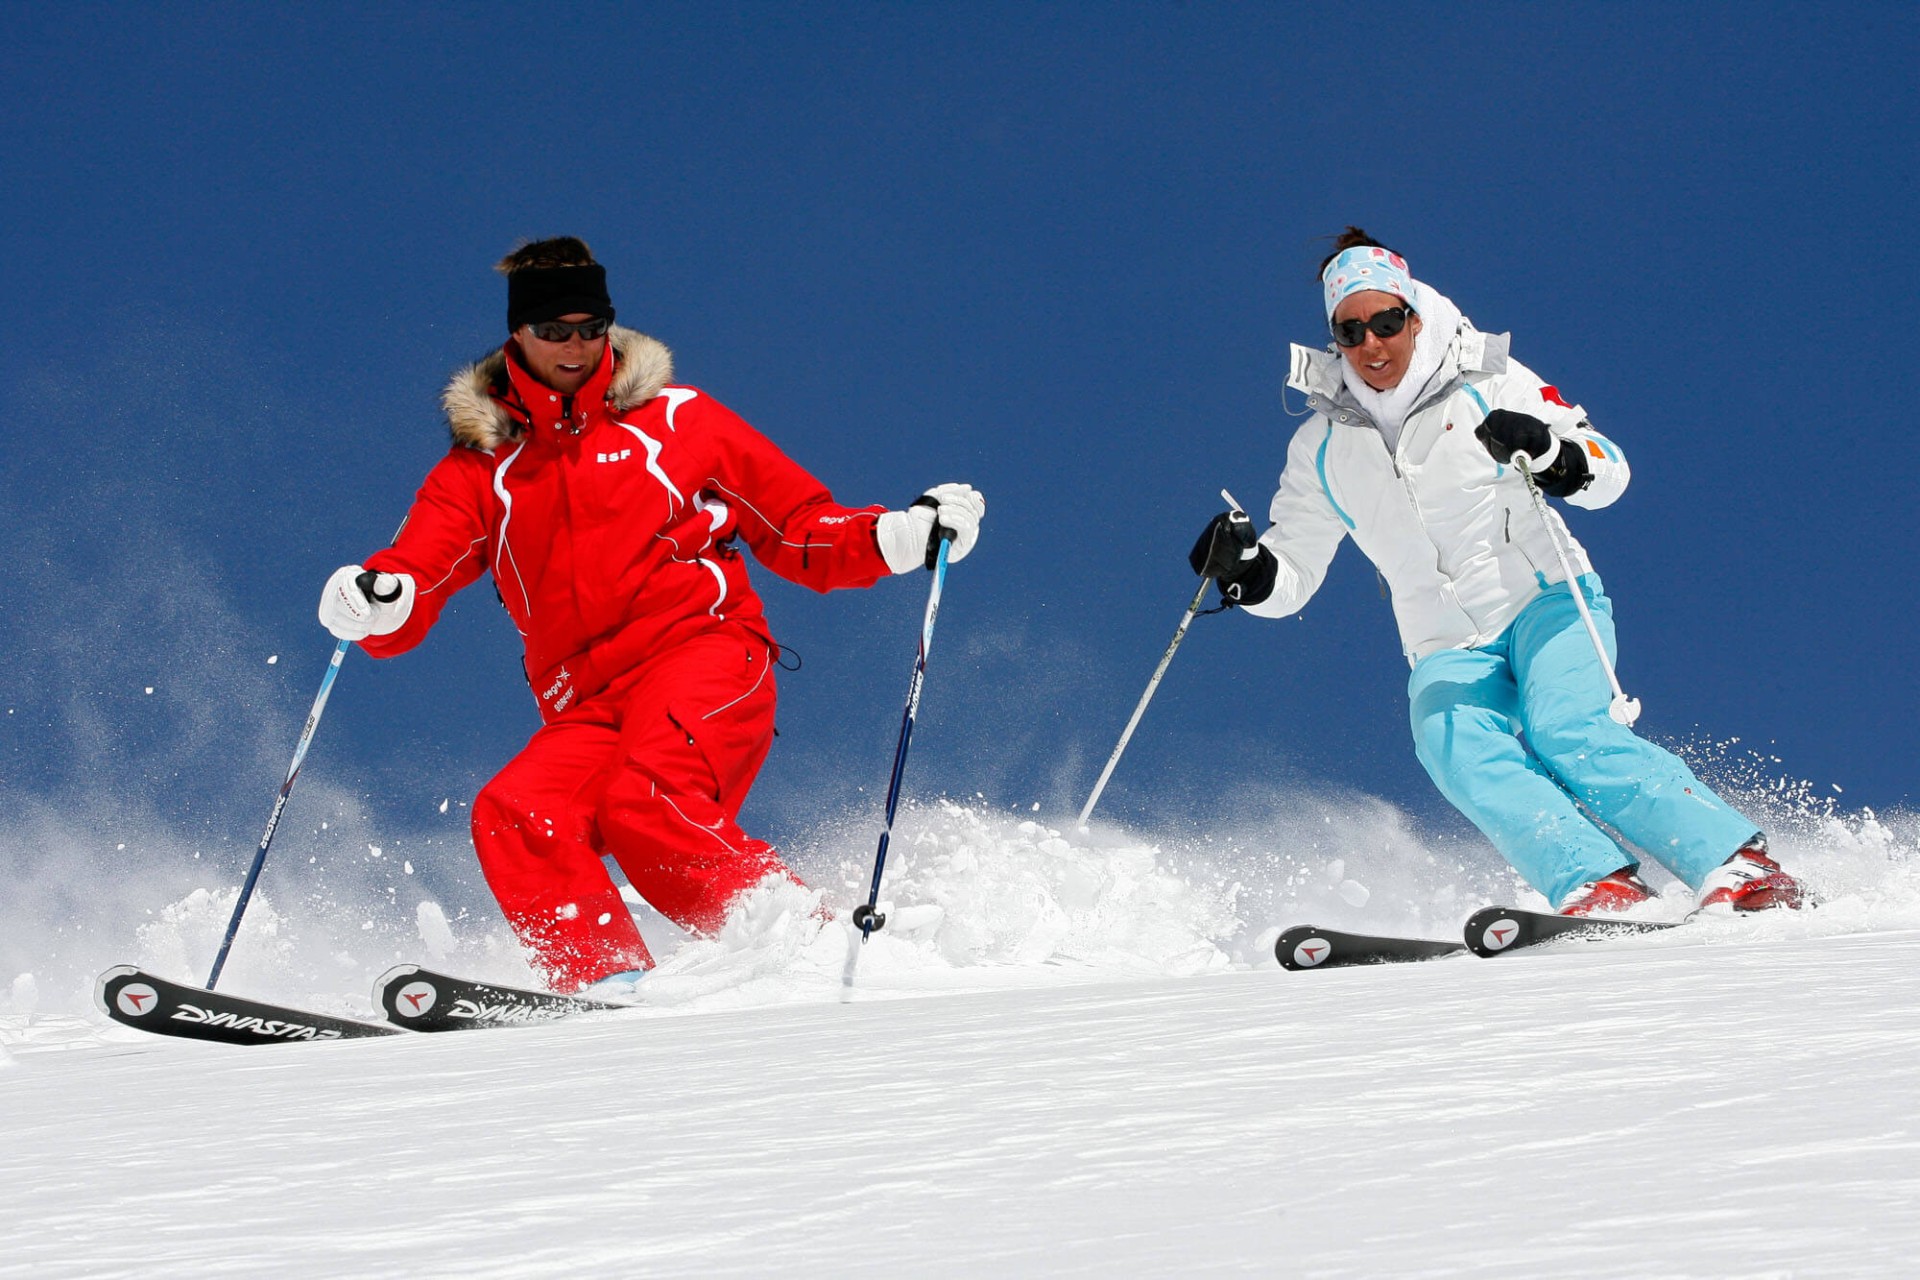 Les Gets - Two for One offer Beginners - Holidays spring Ski